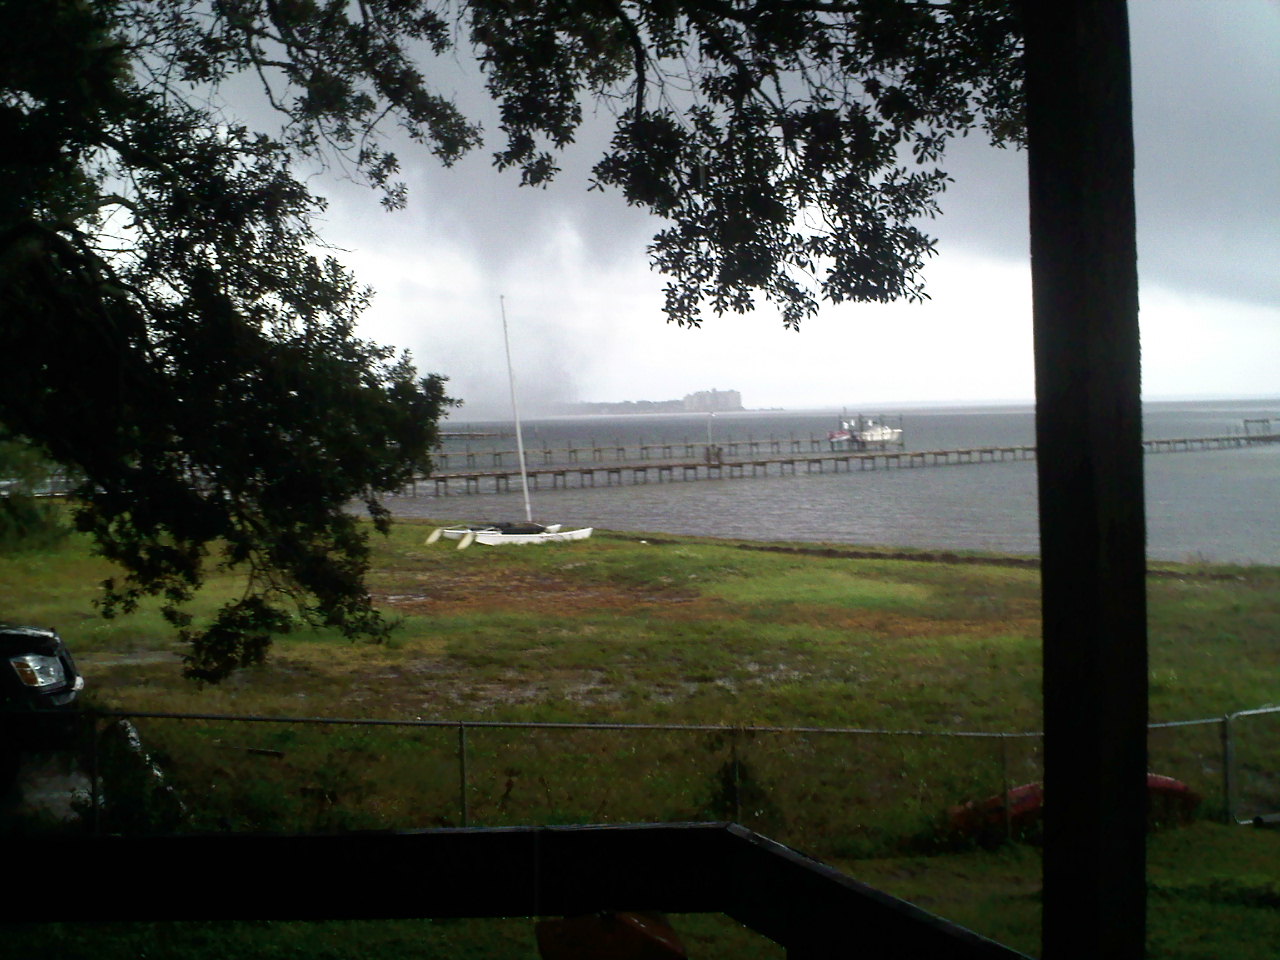 Photo of waterspout over Saint Andrew Bay